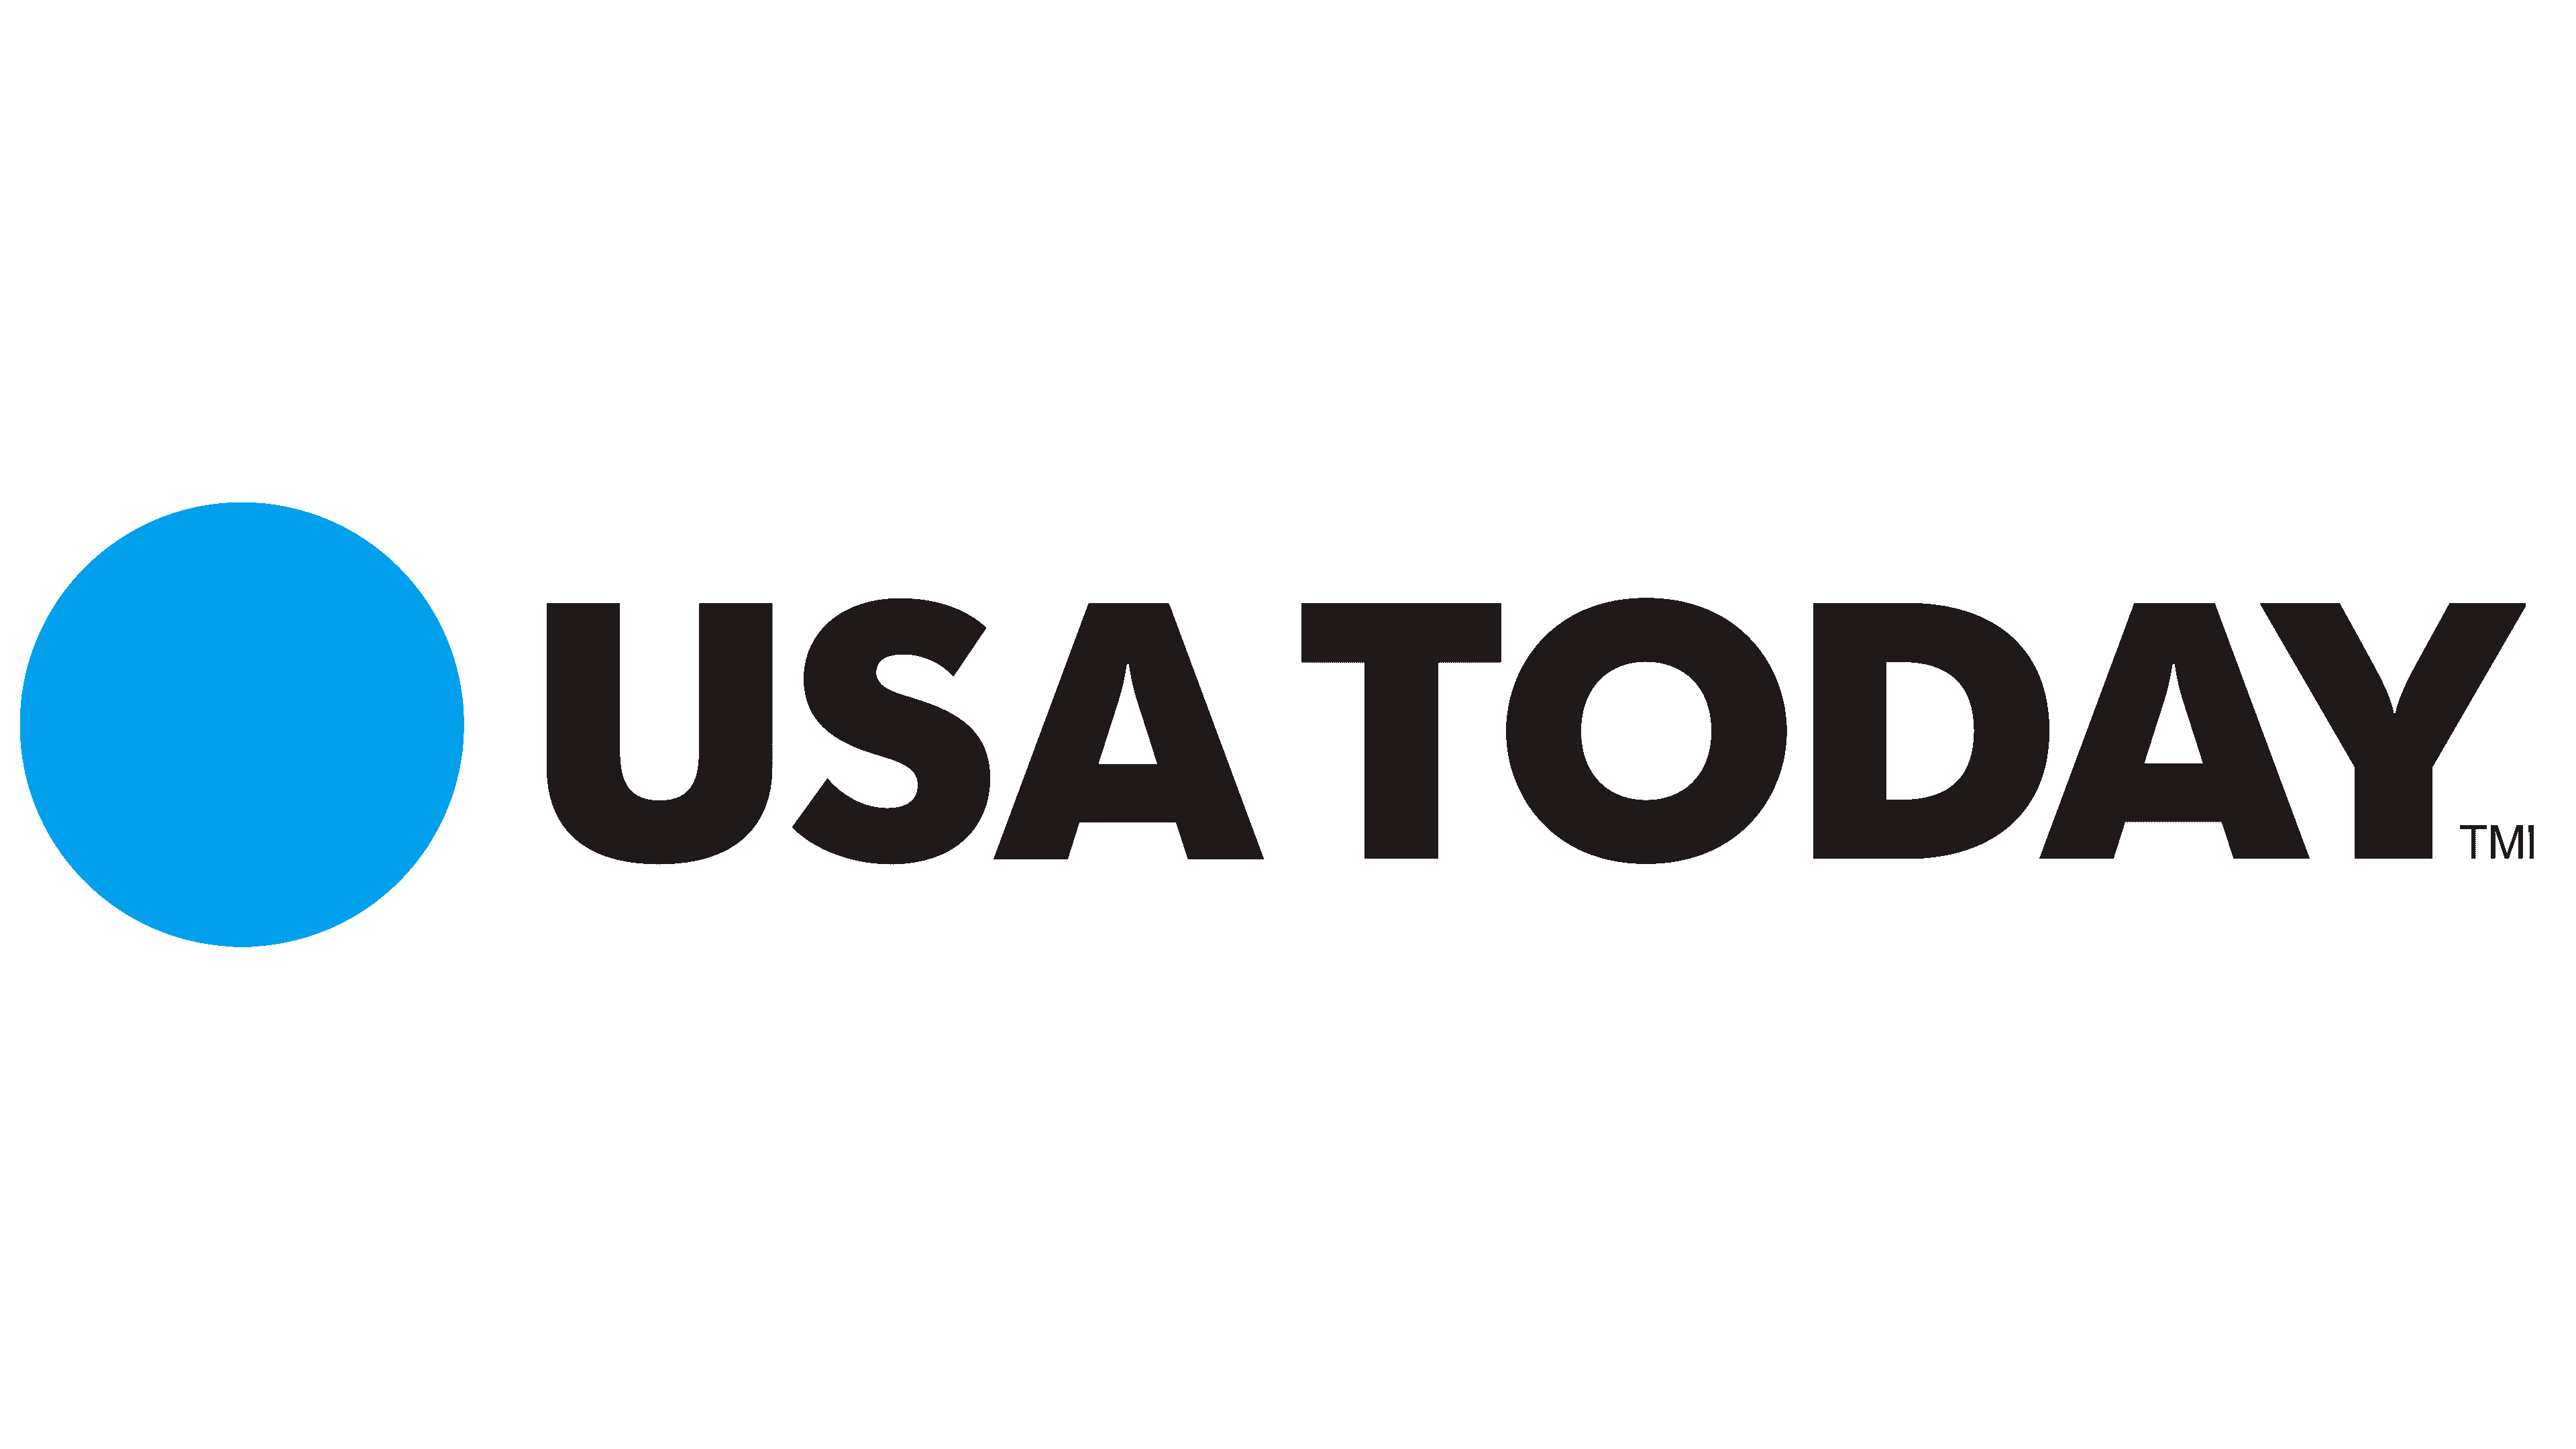 Usa today symbol about us